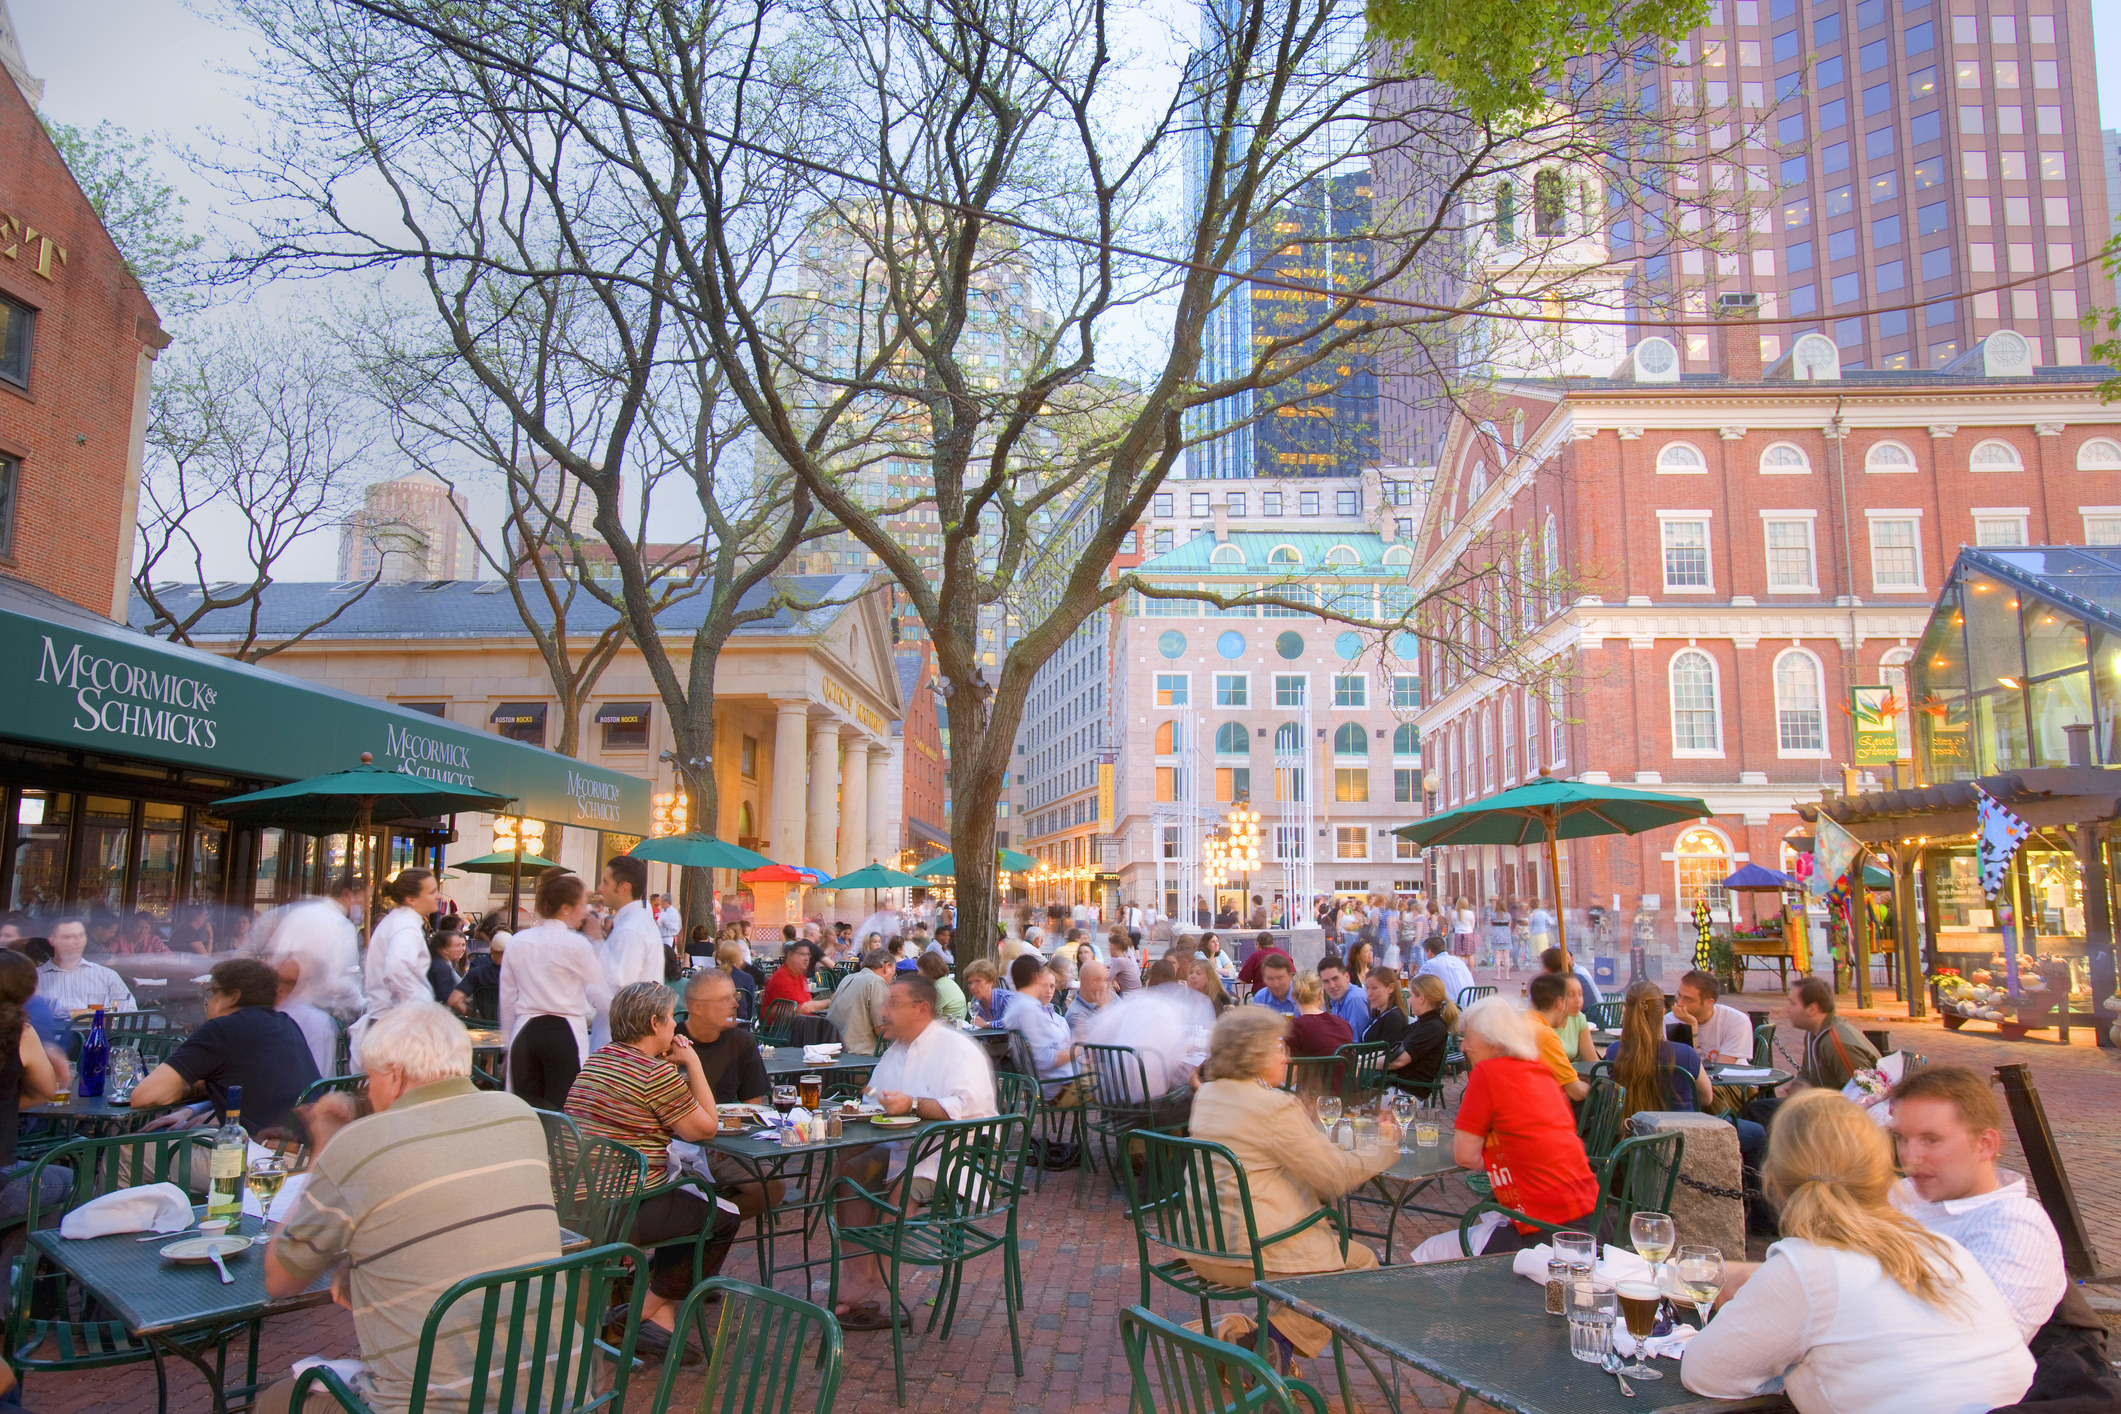 People dining at outdoor tables near Faneuil Hall.